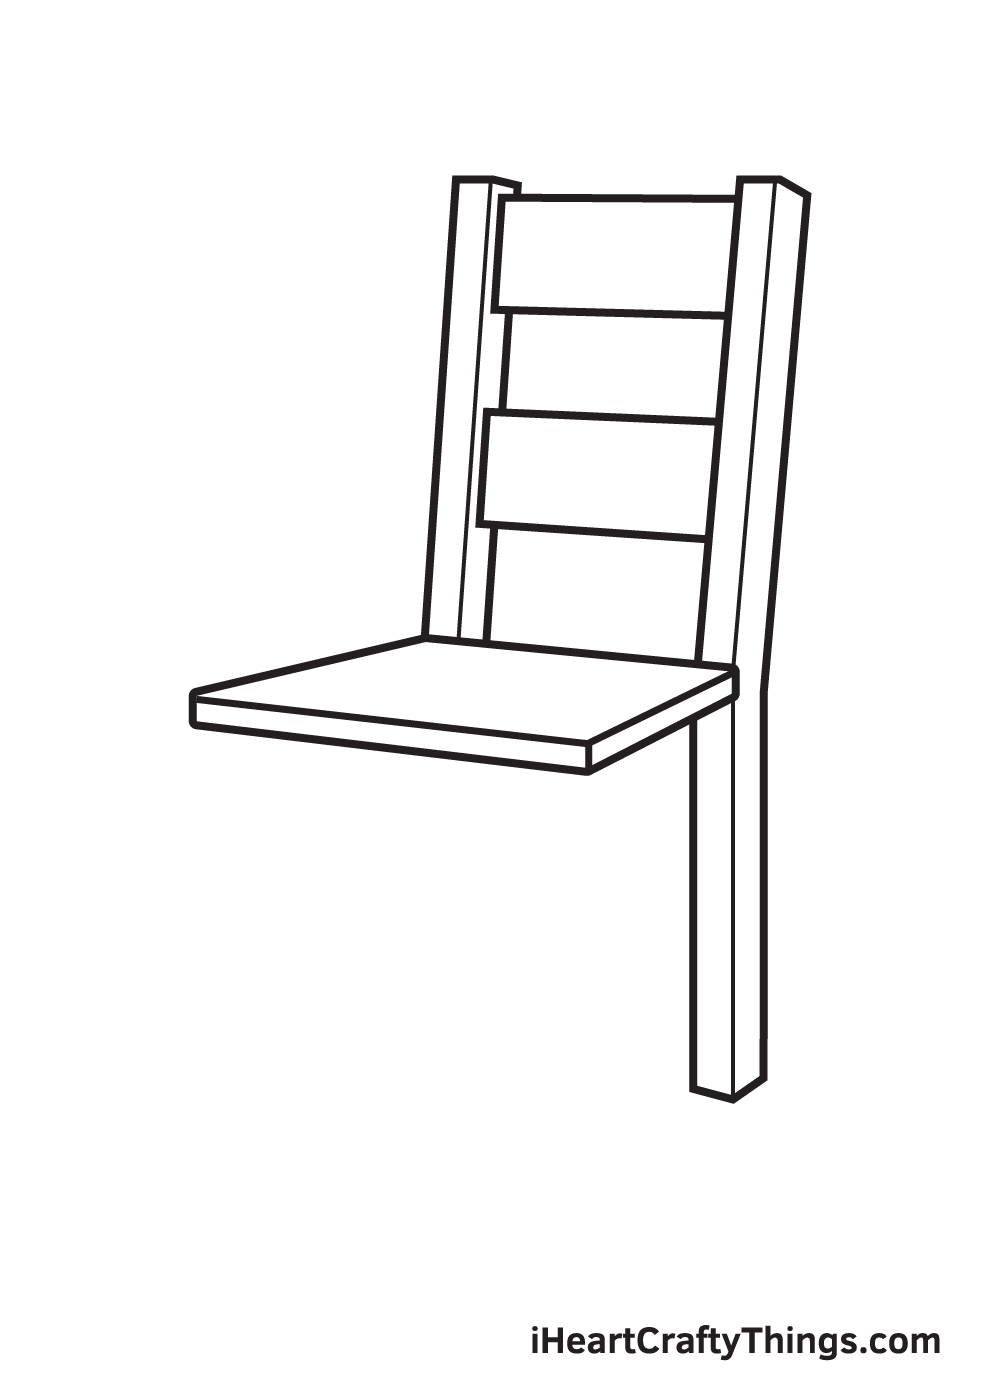 Drawing a chair - Step 5